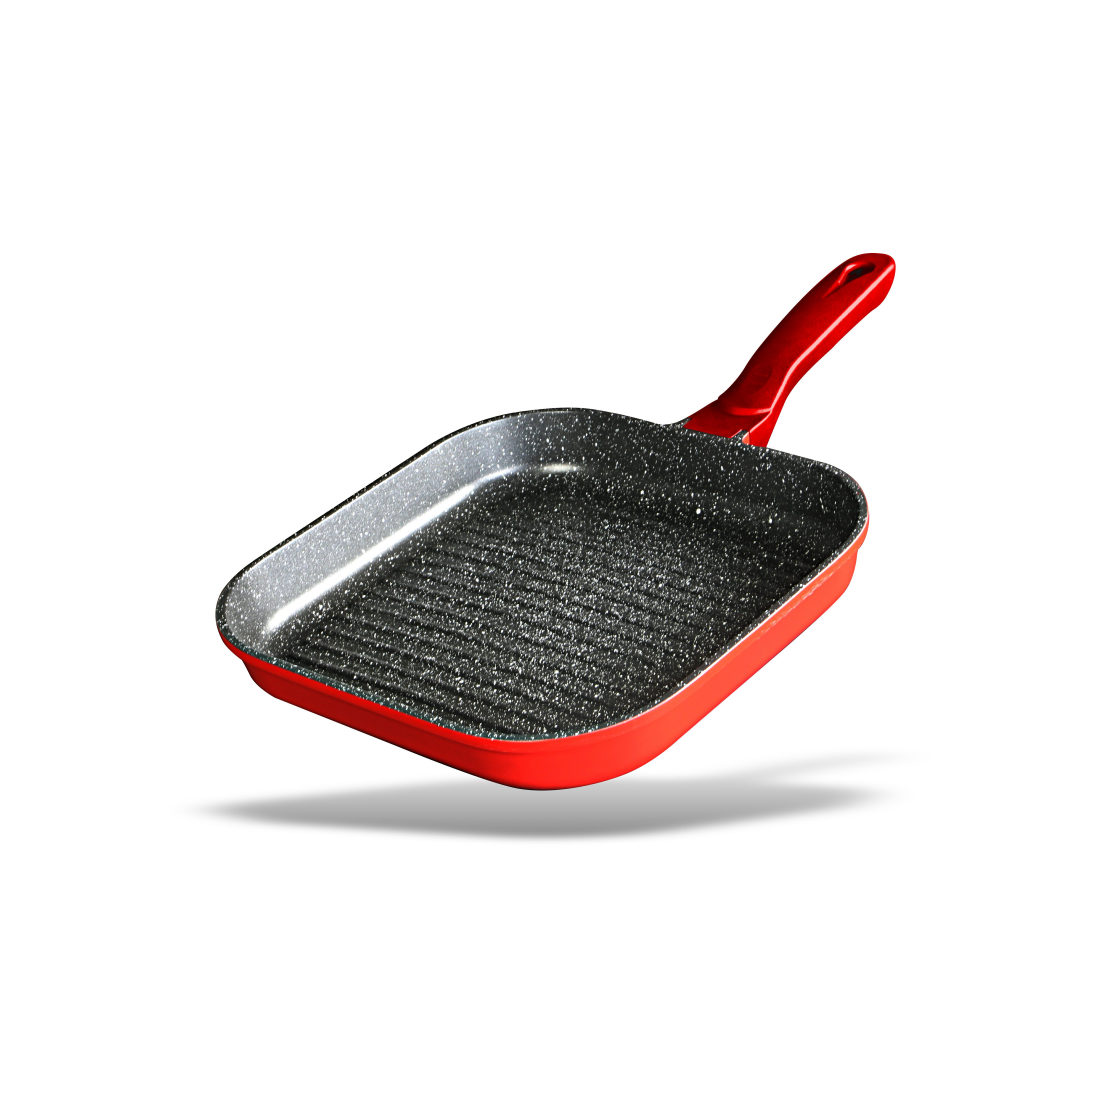 Grill + capac, 28x4 cm, Home Chef